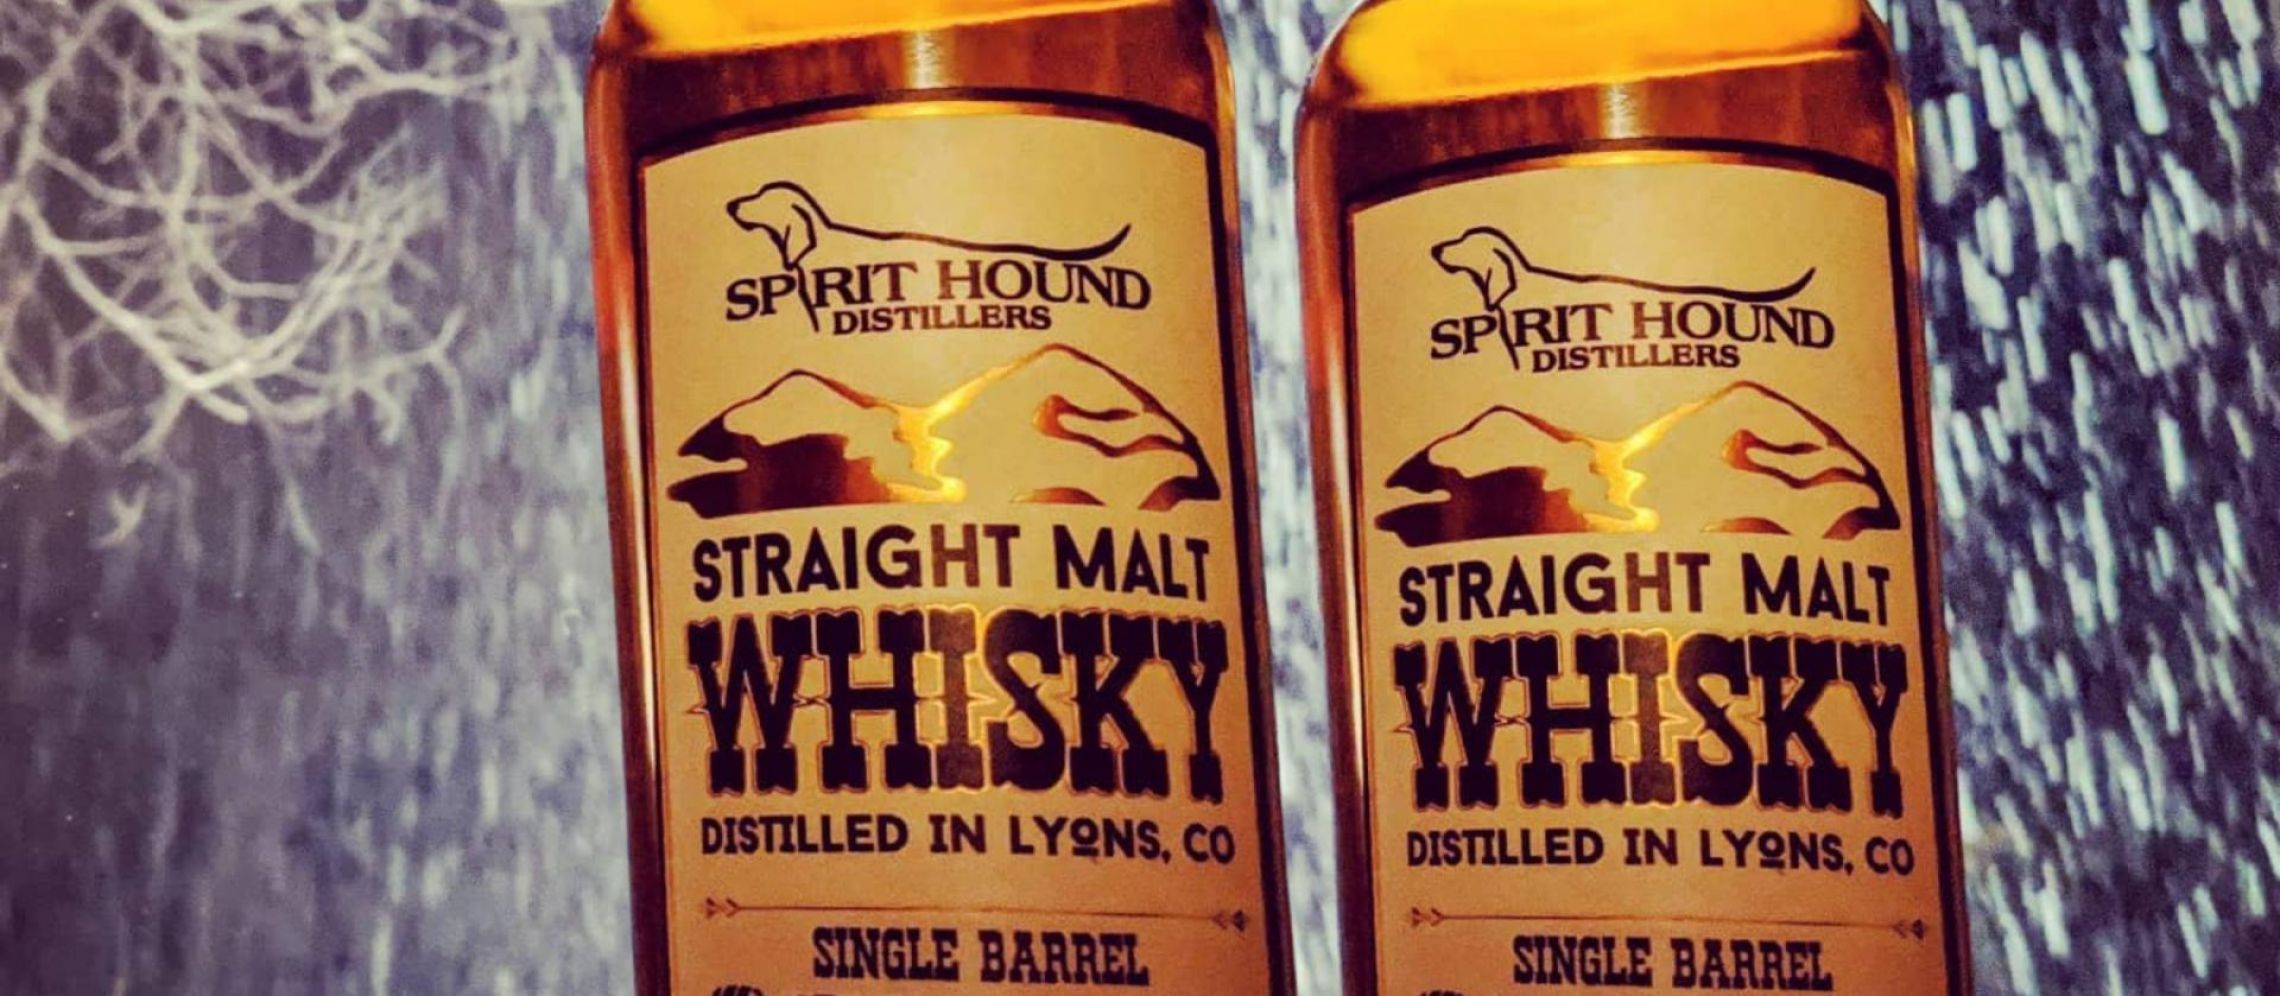 Photo for: Colorado’s SPIRIT HOUND Straight Malt Whisky claims WHISKY OF THE YEAR 2022